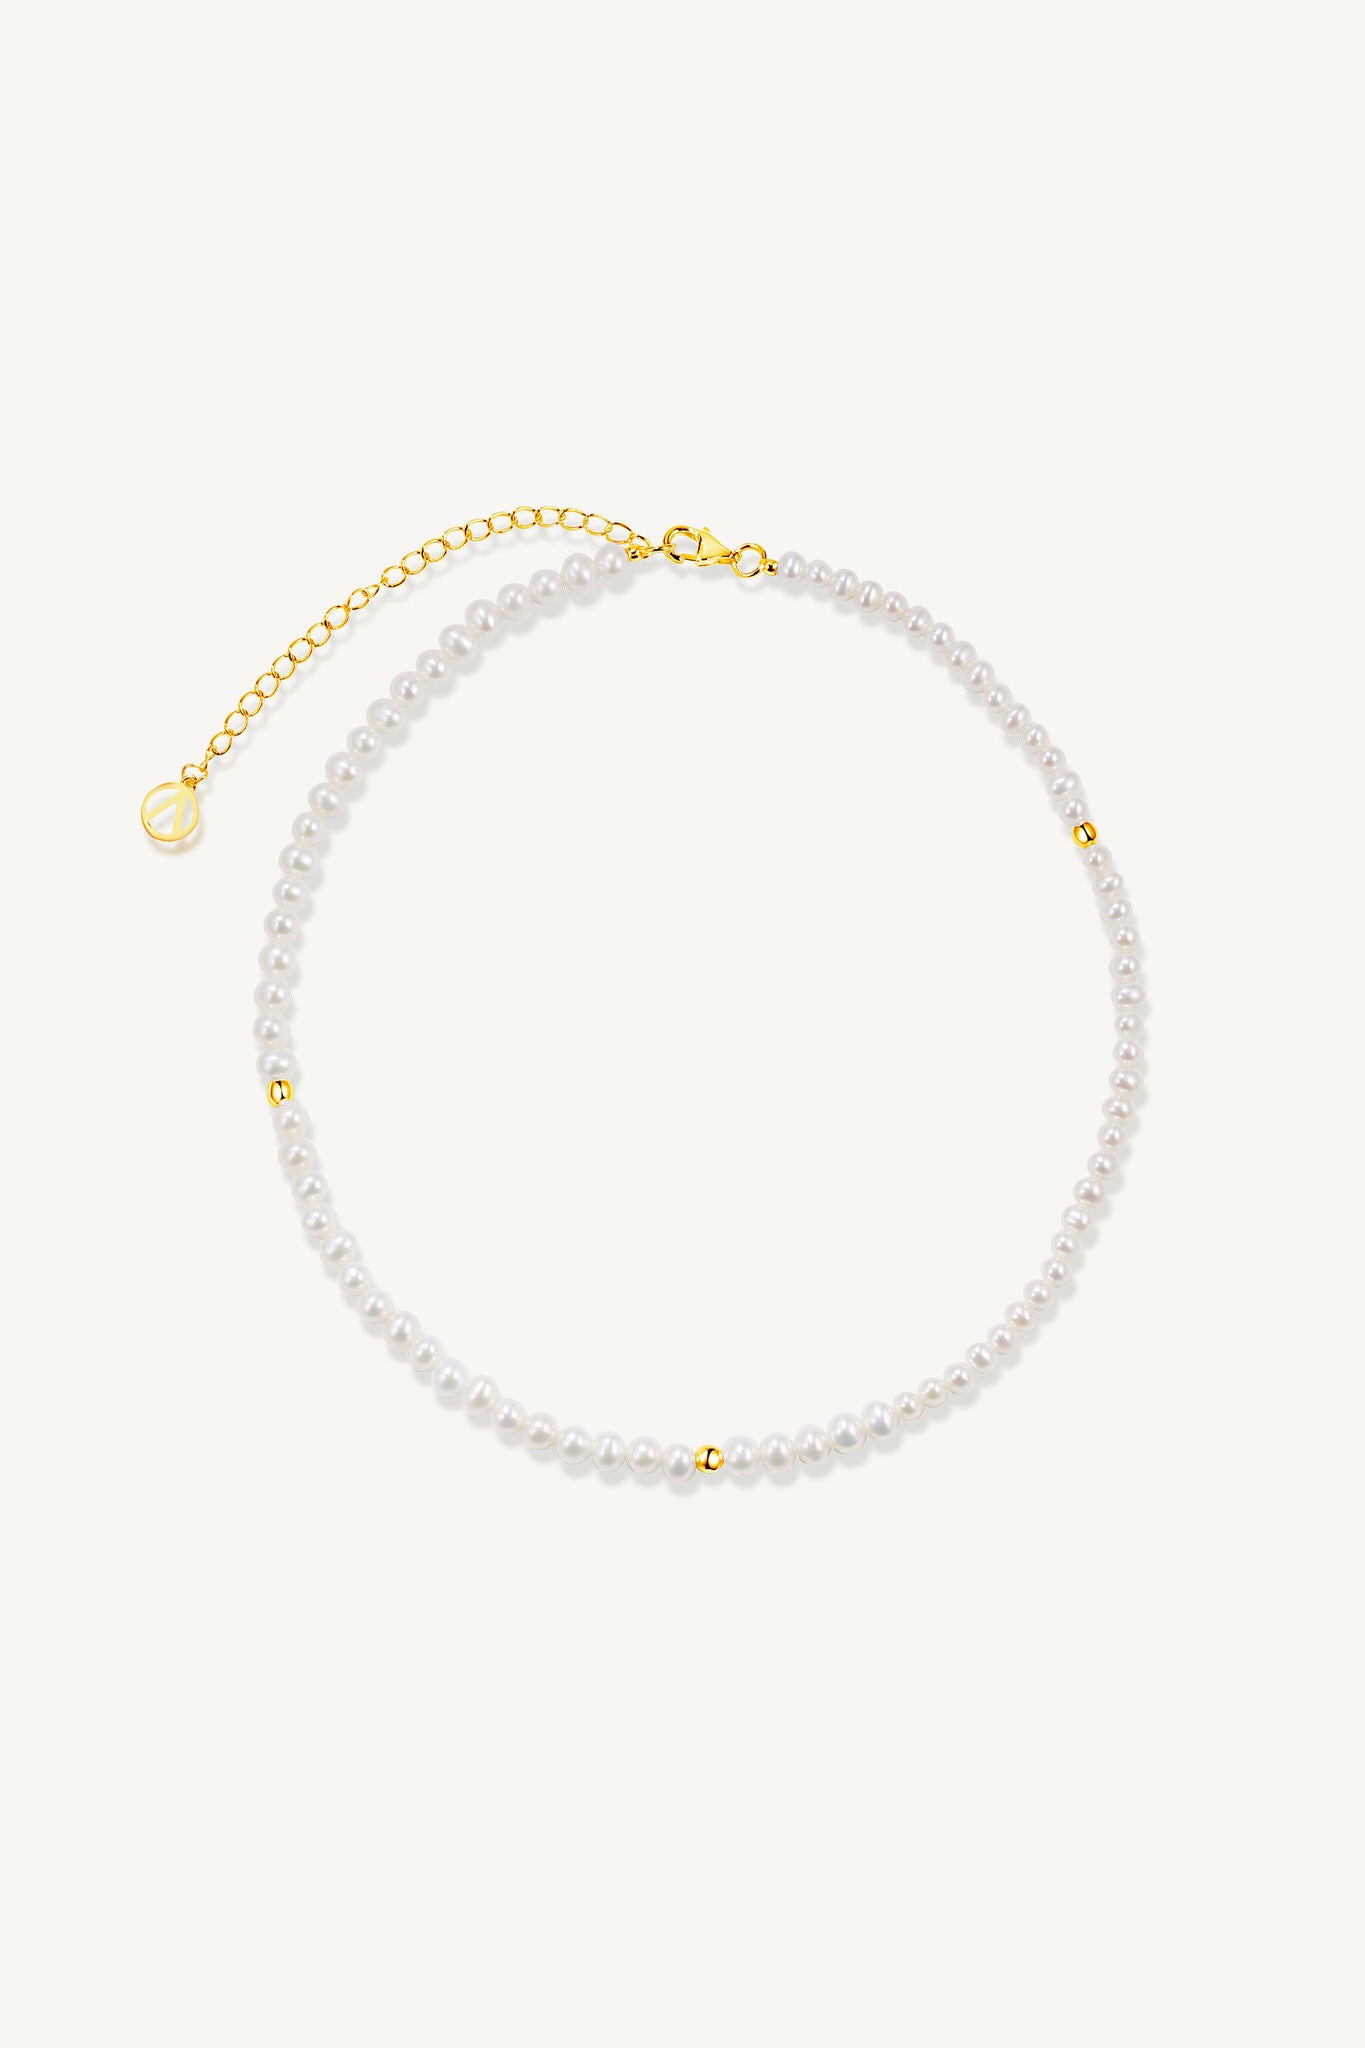 Round Freshwater Pearl with Organic Shaped Beads Choker Gold Vermeil